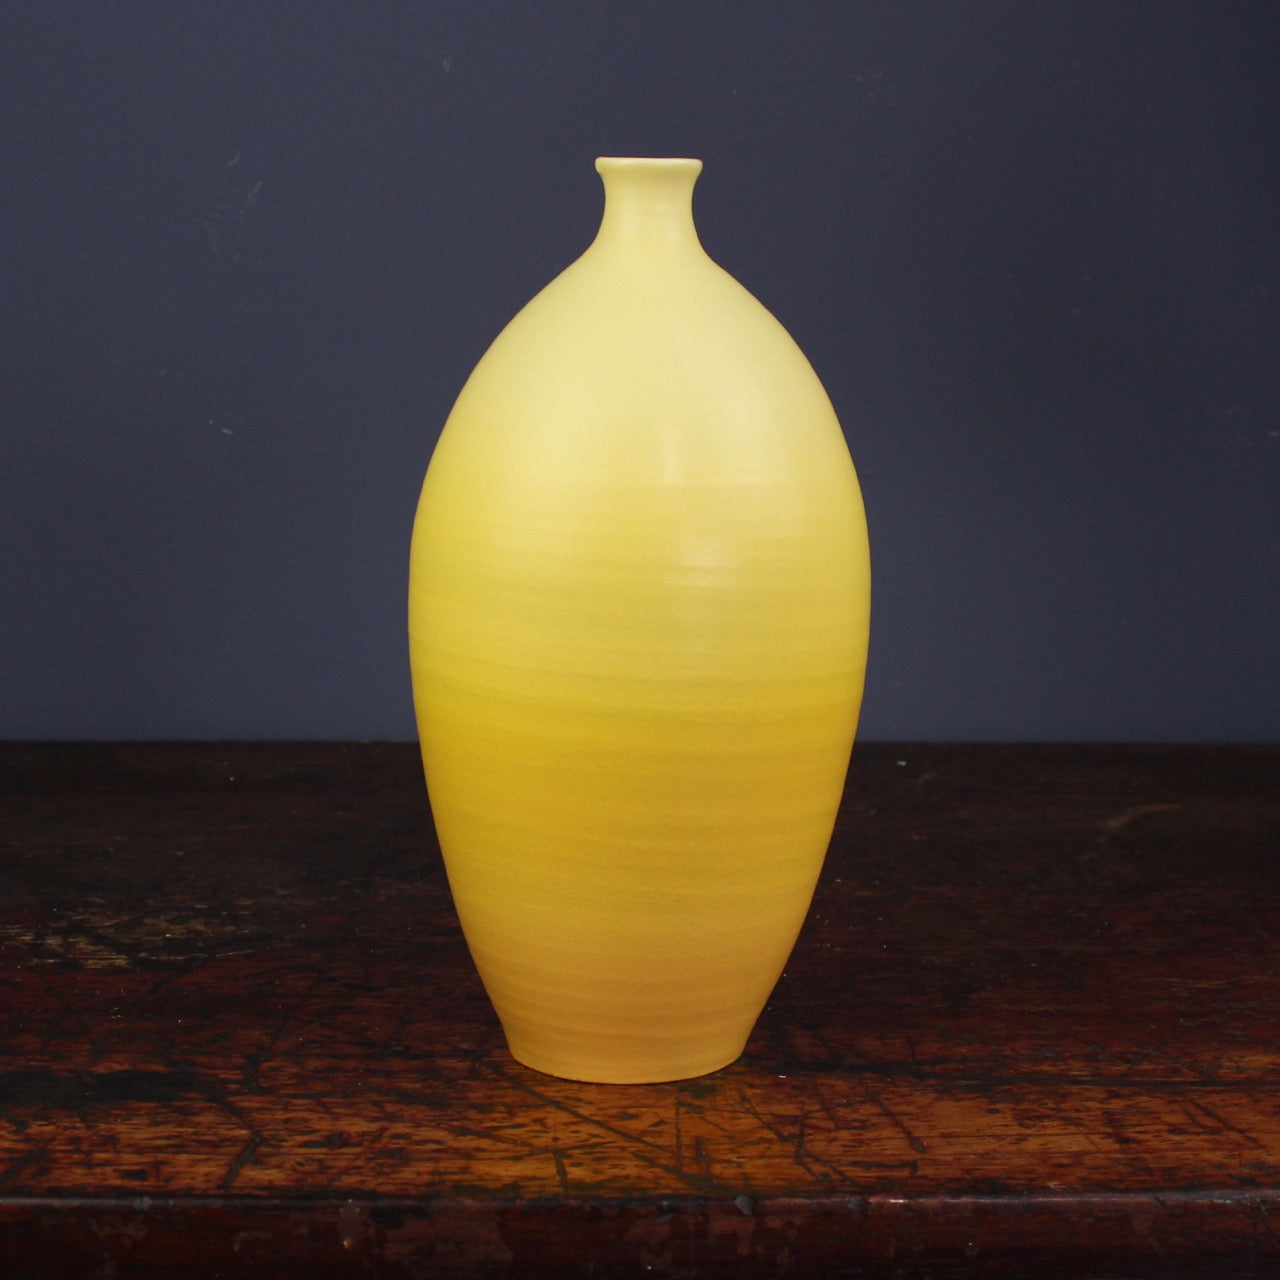 A Tall yellow curved bottle by Lucy Burley on a wooden table